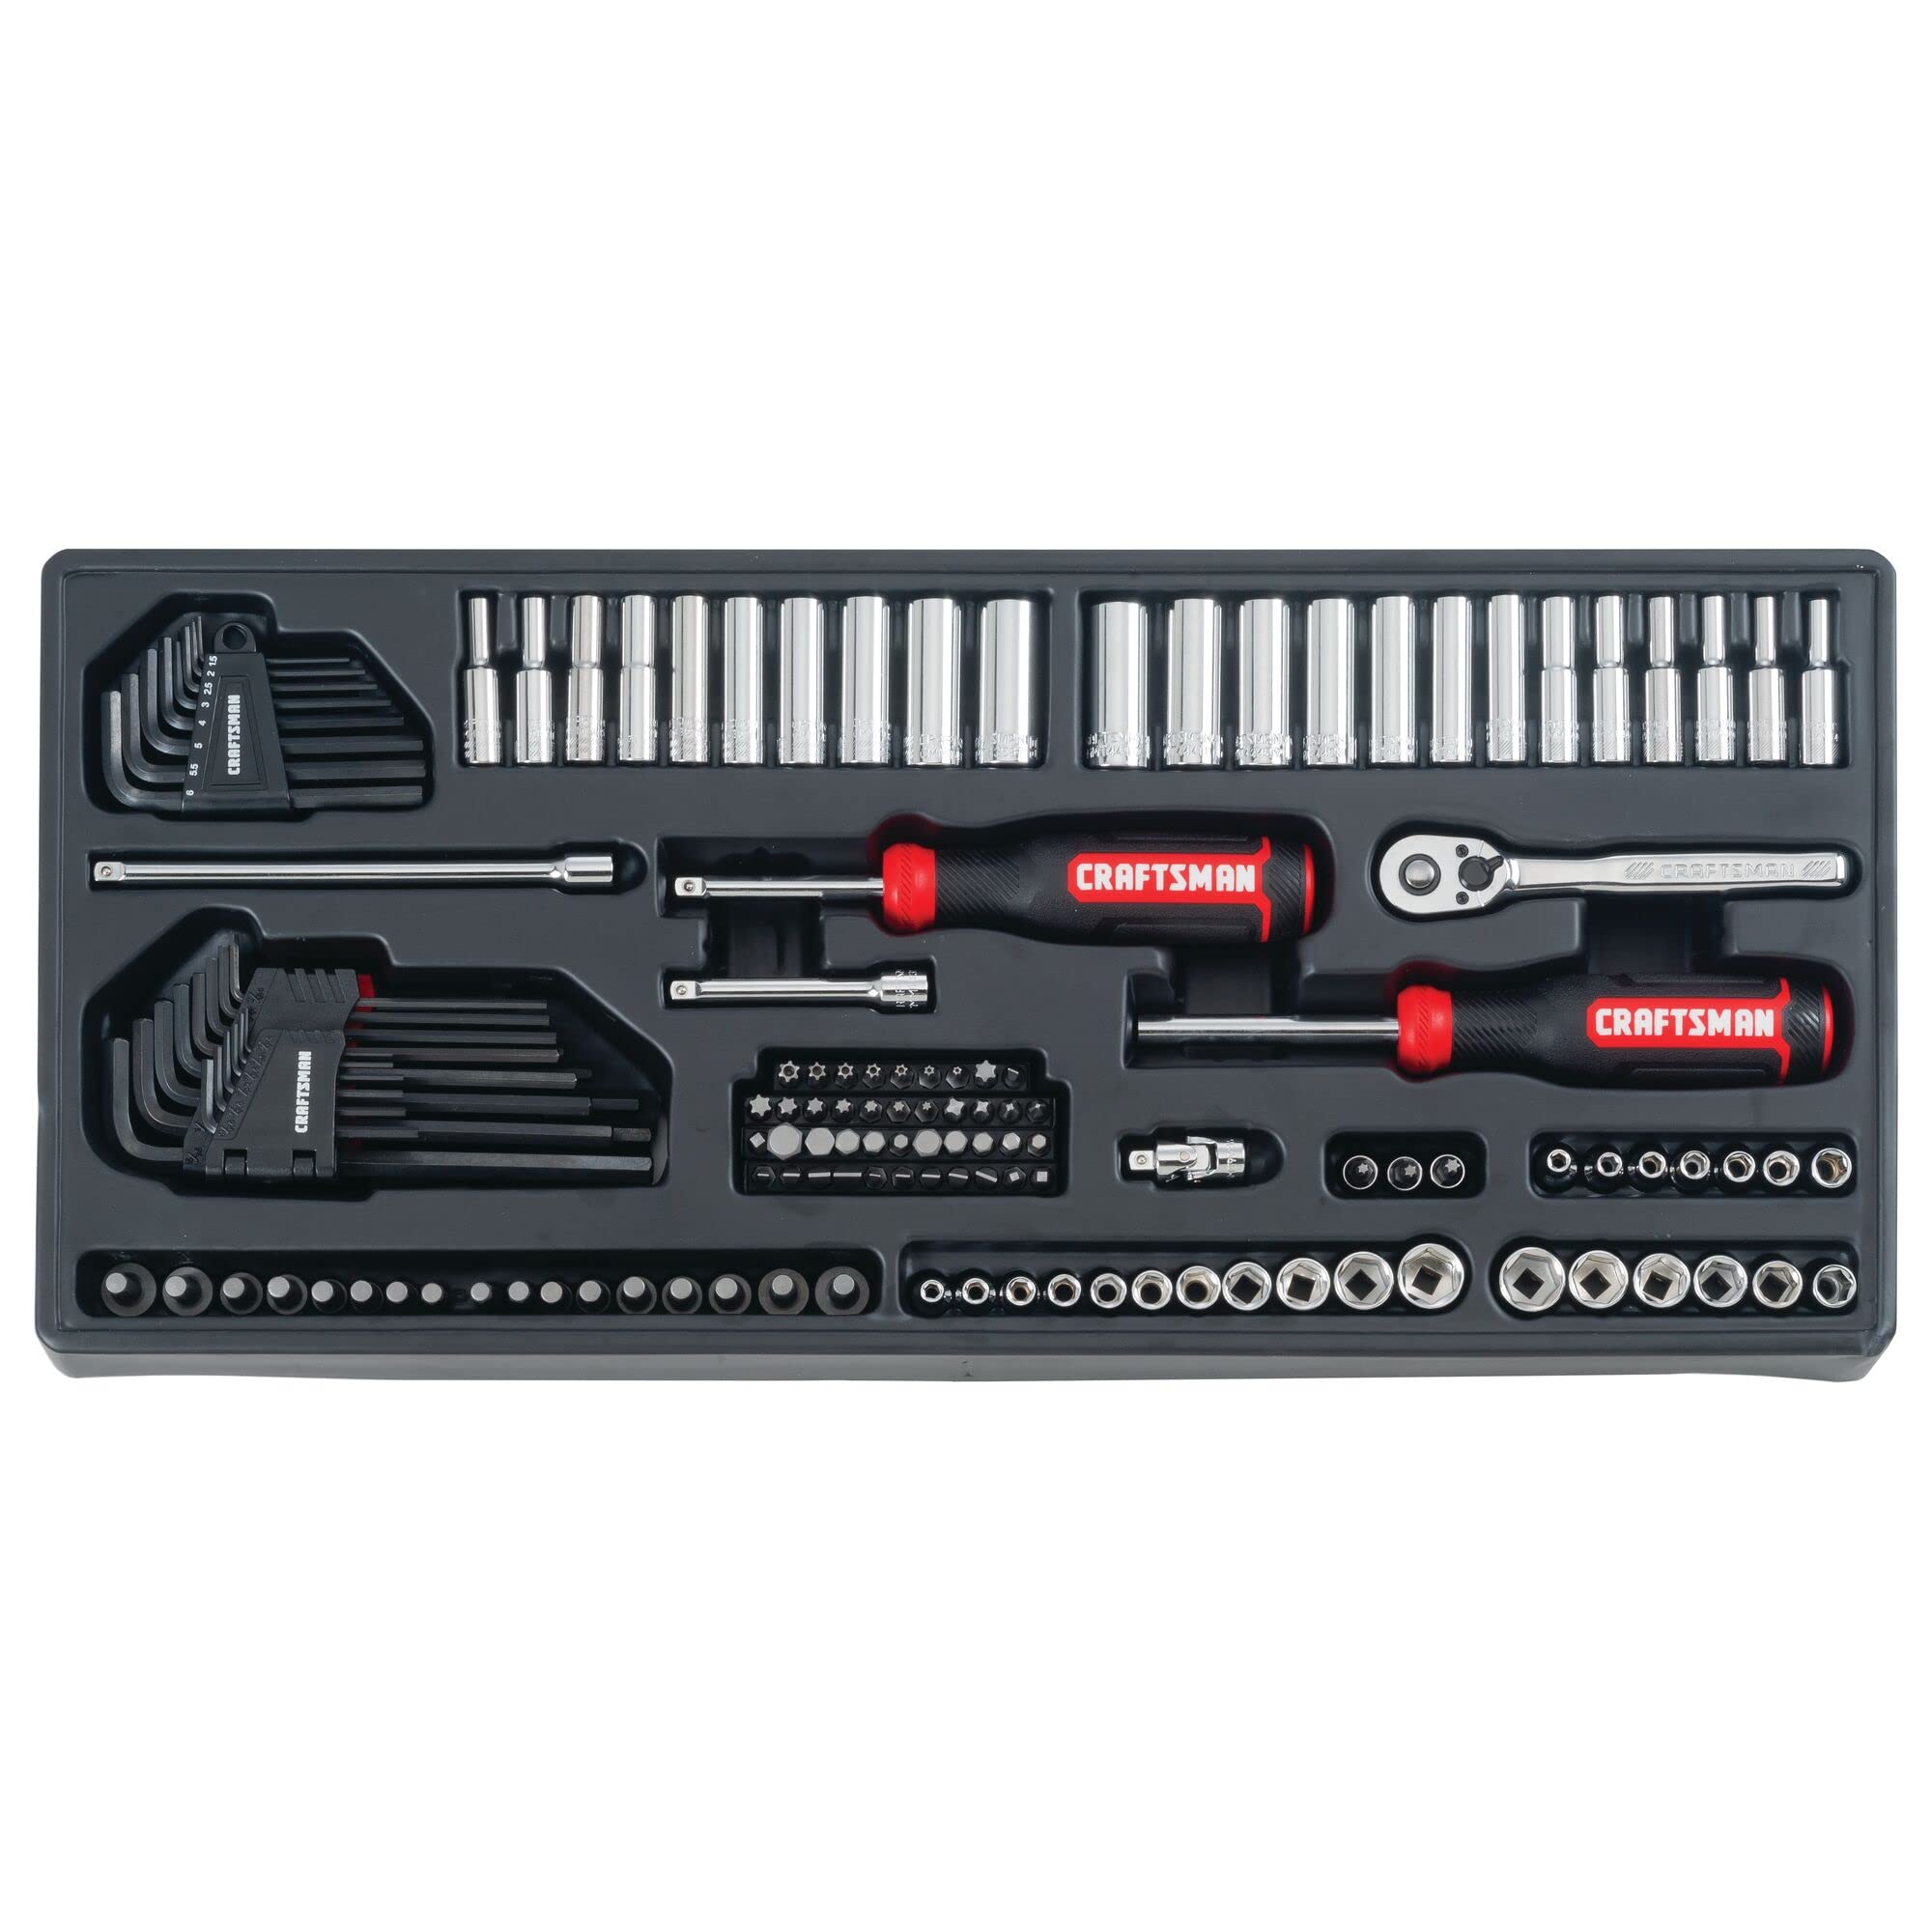 Craftsman 1/4, 3/8 and 1/2 in. drive Metric and SAE 6 and 12 Point Mechanics Tool Set 308 pc. - image 5 of 6